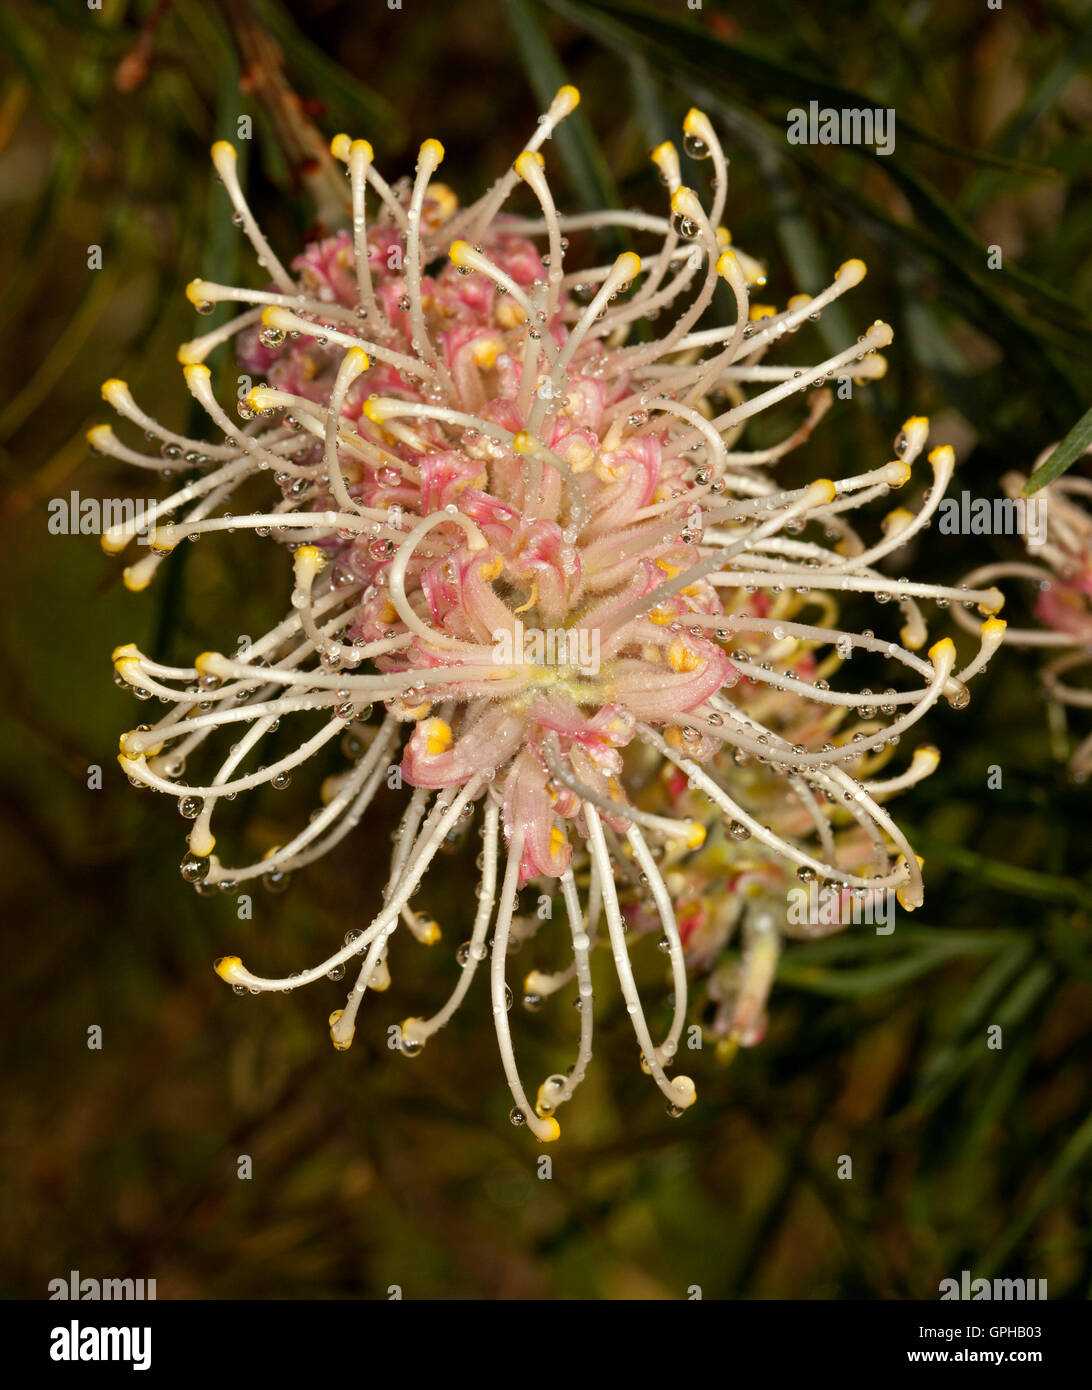 Spectacular pale pink flower of Grevillea with raindrops glittering on stamens, Australian native plant on dark background Stock Photo